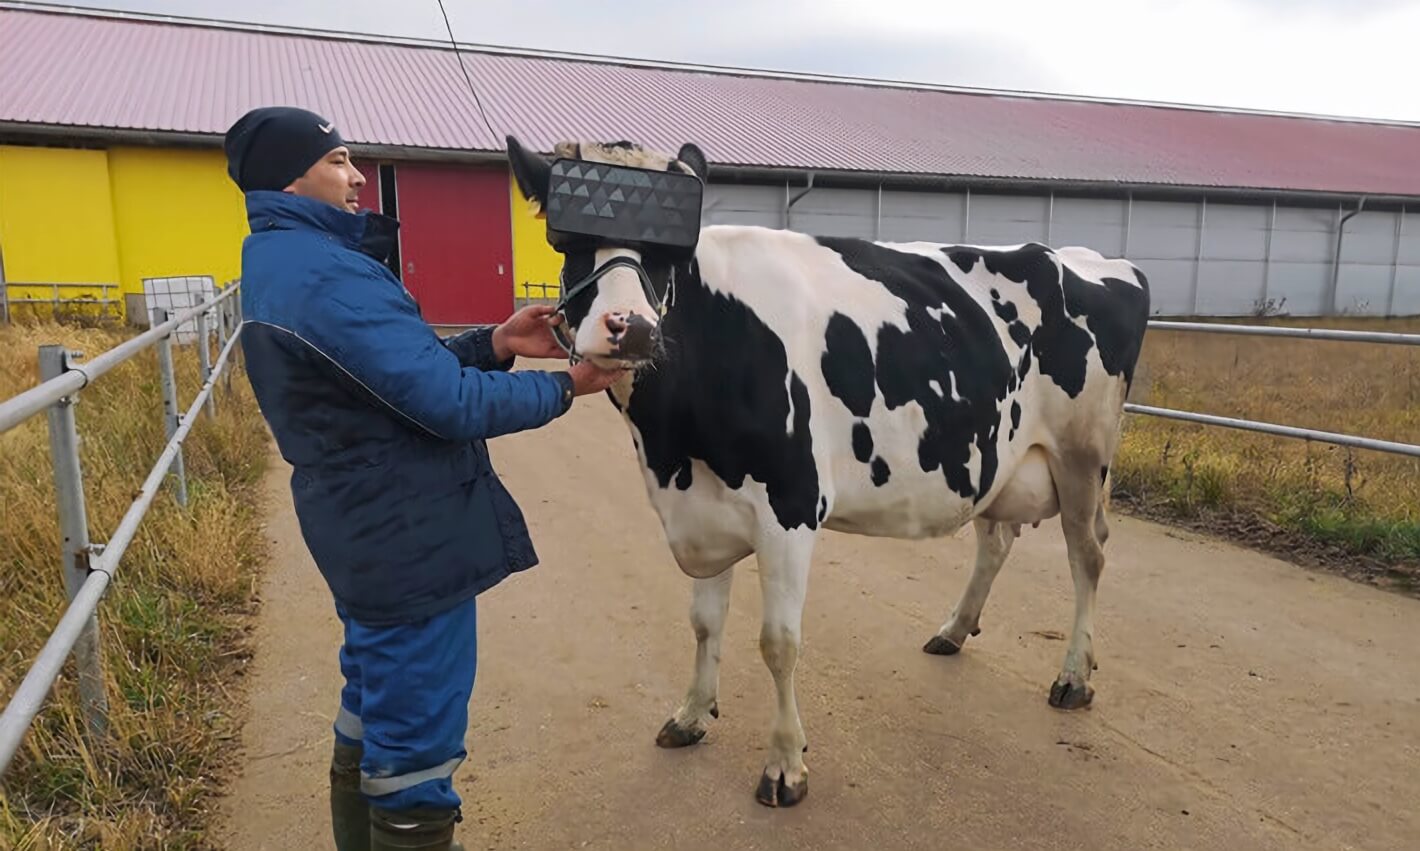 Moscow farmers fit cows with VR headsets to improve their mood and boost milk production